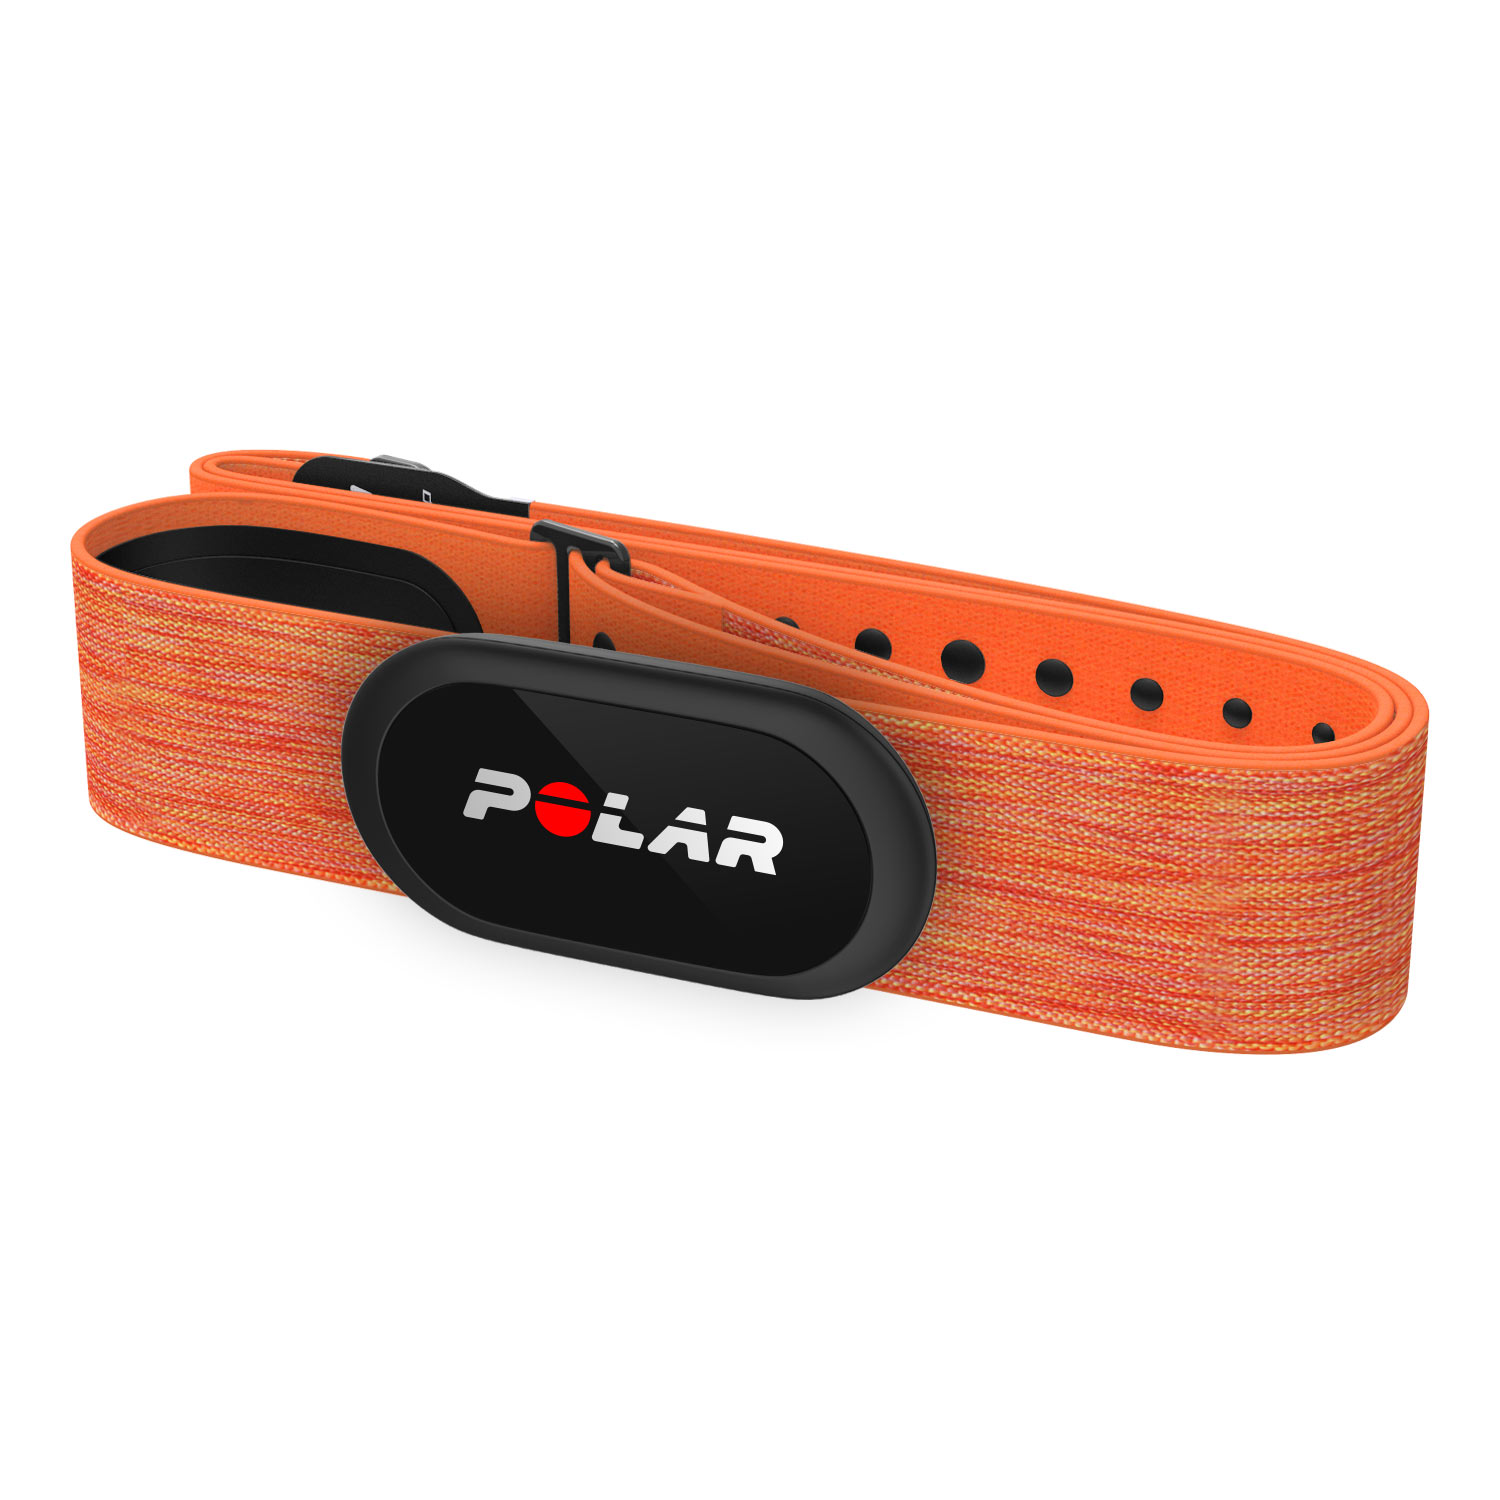 Polar H10 | Heart rate monitor chest 